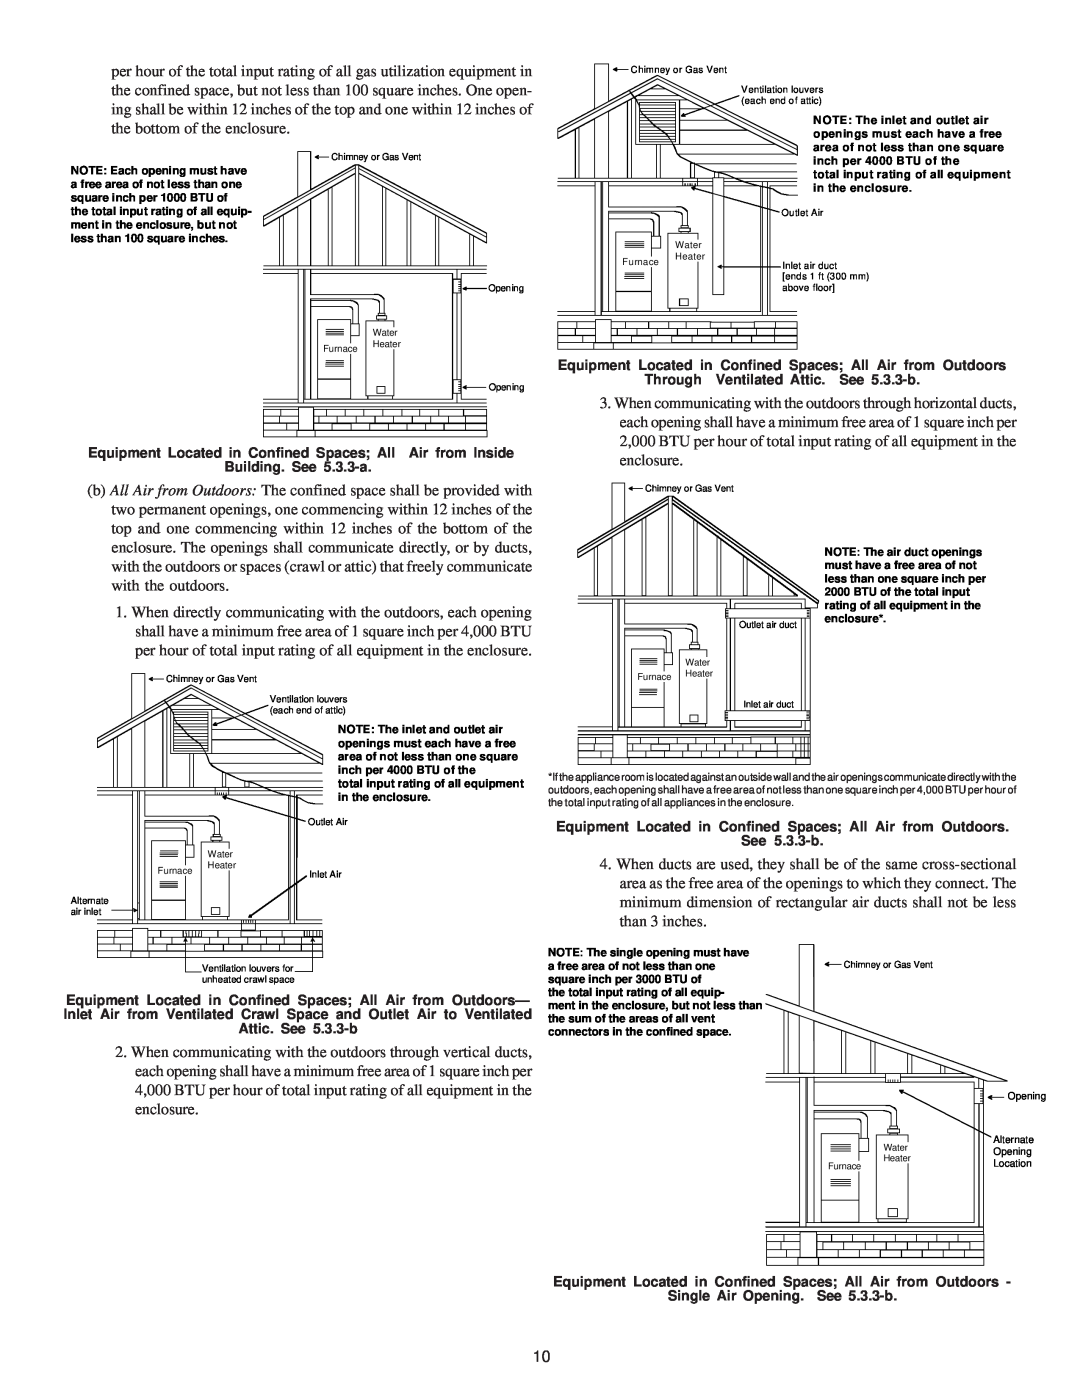 Amana AMV9, ACV9 installation instructions Building. See 5.3.3-a 